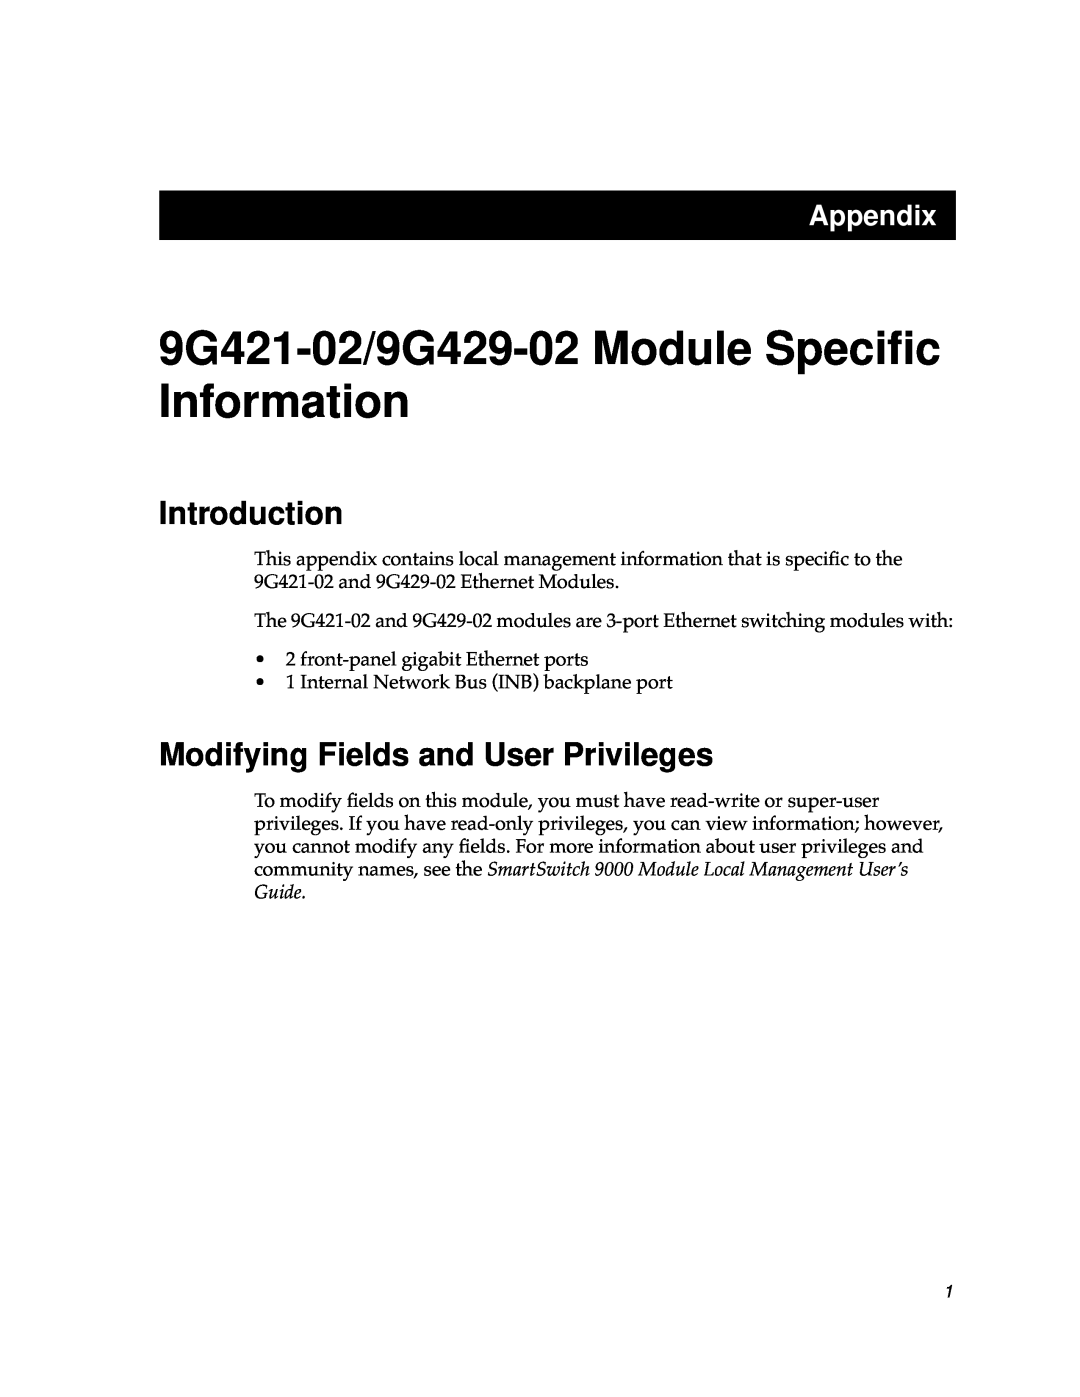 Cabletron Systems 9G421-02, 9G429-02 appendix Introduction, Modifying Fields and User Privileges, Appendix 